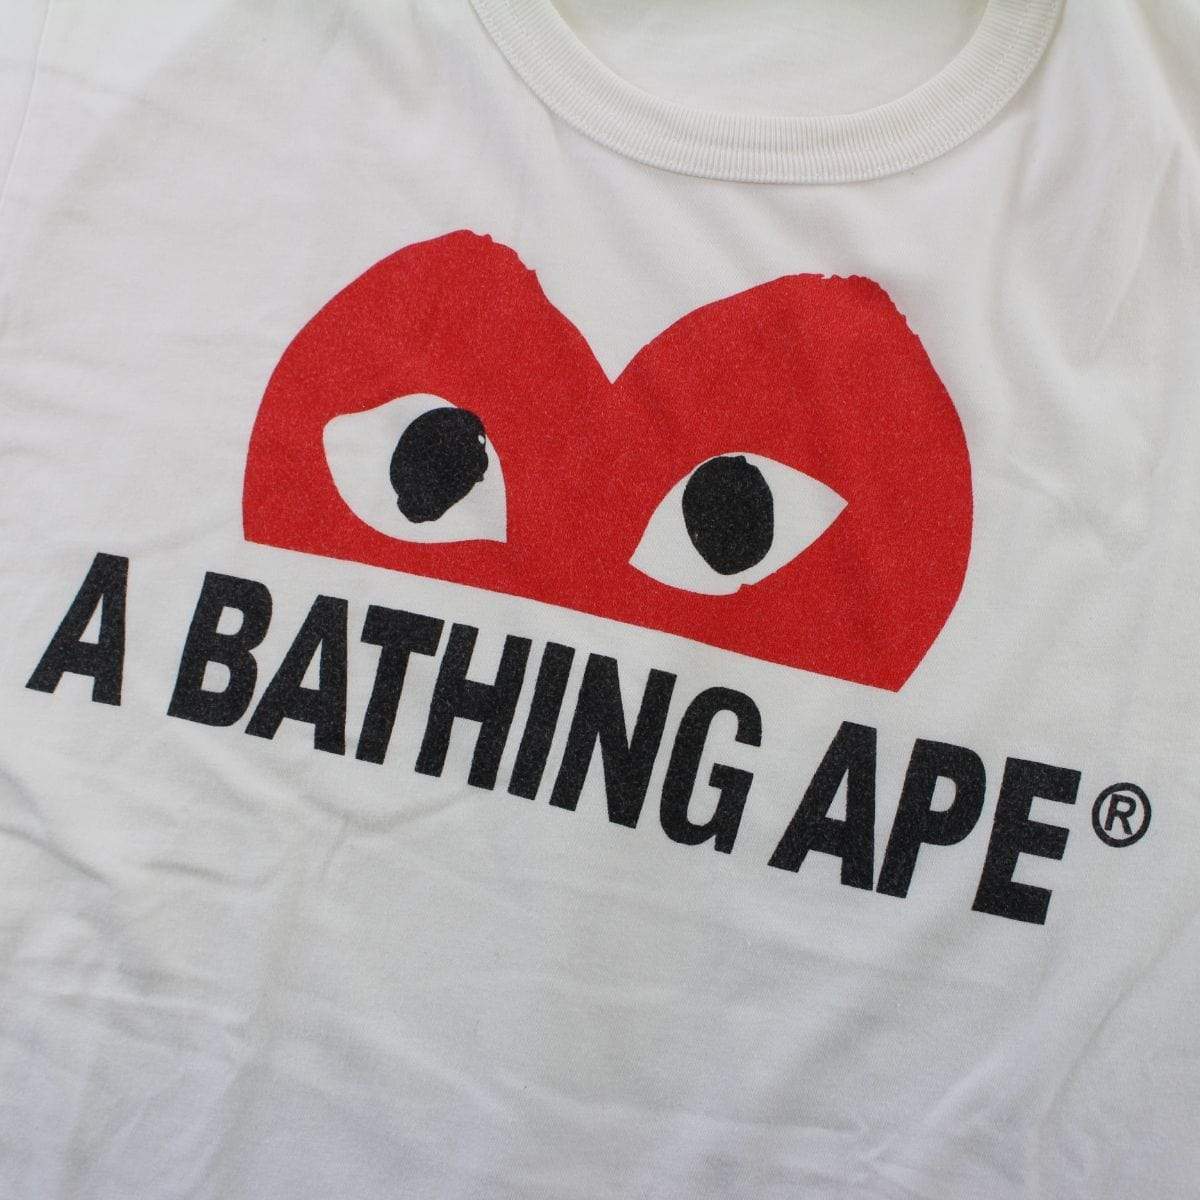 Bape x CDG Heart Text Tee White - SaruGeneral